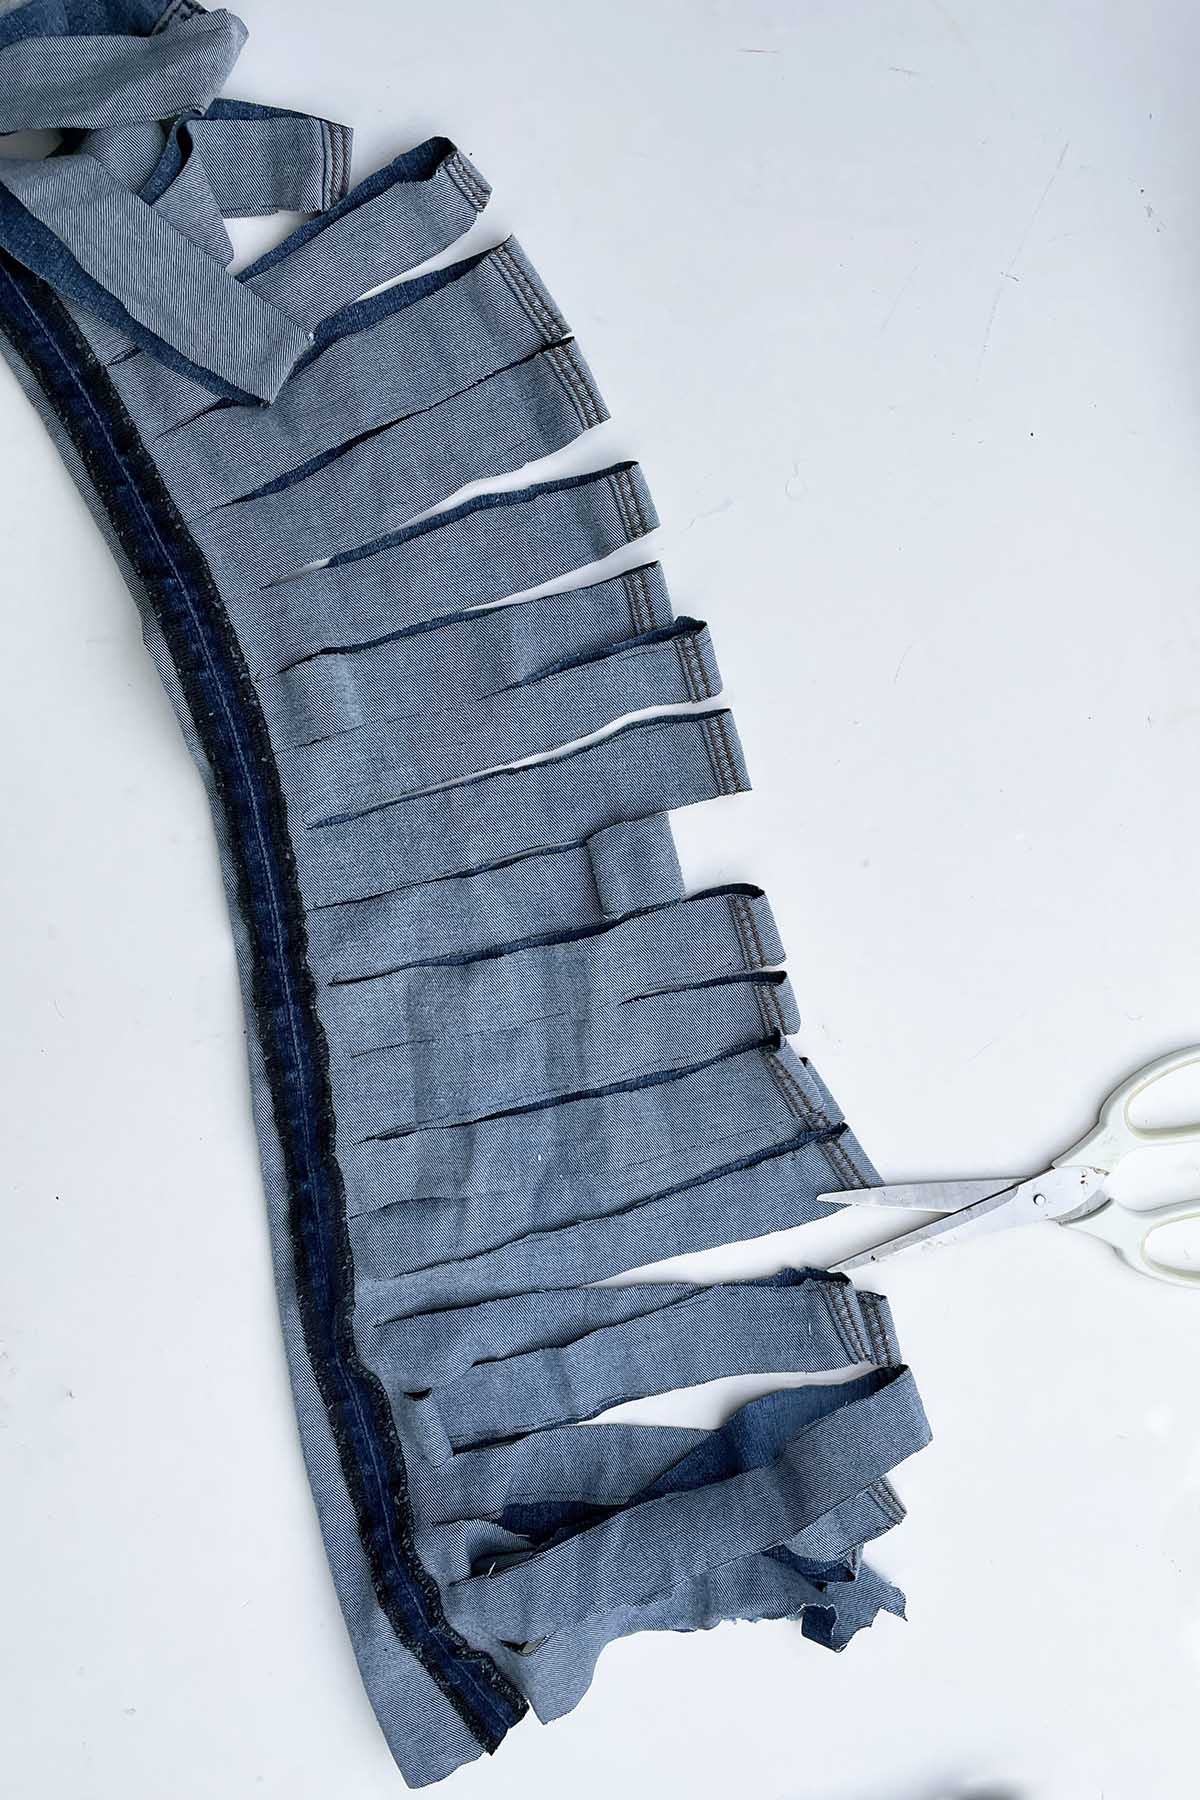 Fringing the leg of a pair of jeans with scissors